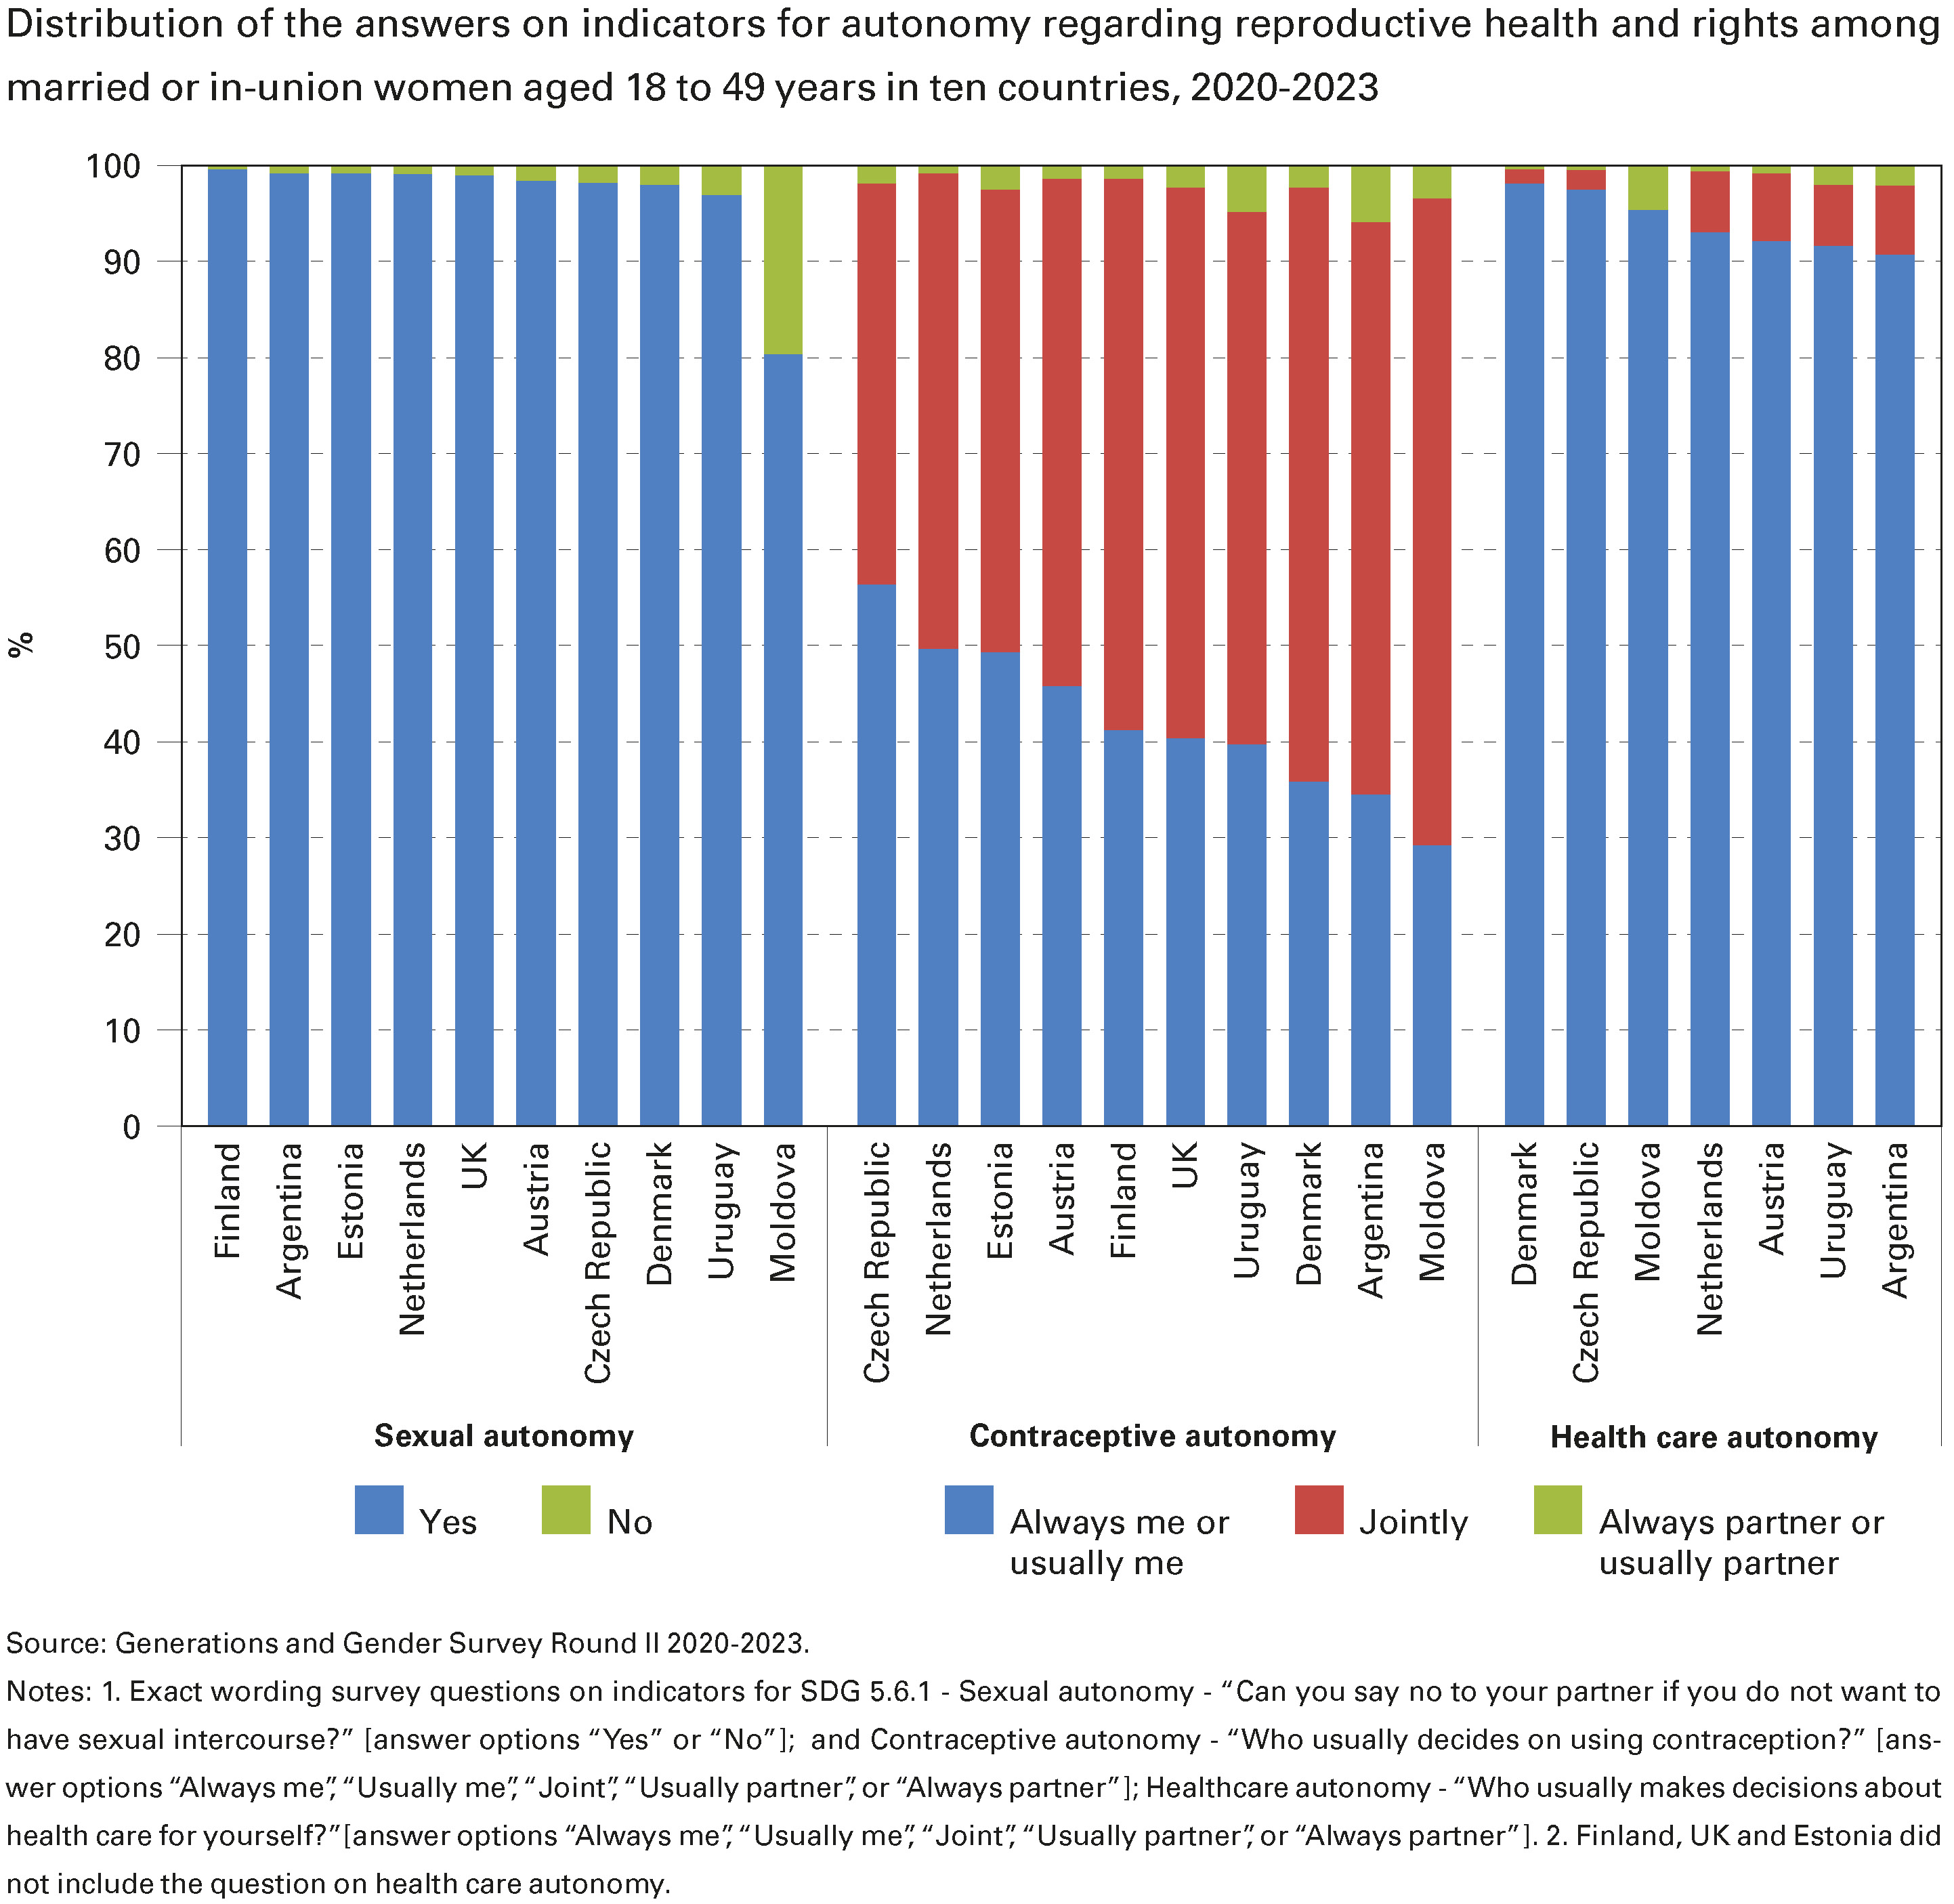 Distribution of the answers on indicators for autonomy regarding reproductive health and rights among married or in-union women aged 18 to 49 years in ten countries, 2020-2023